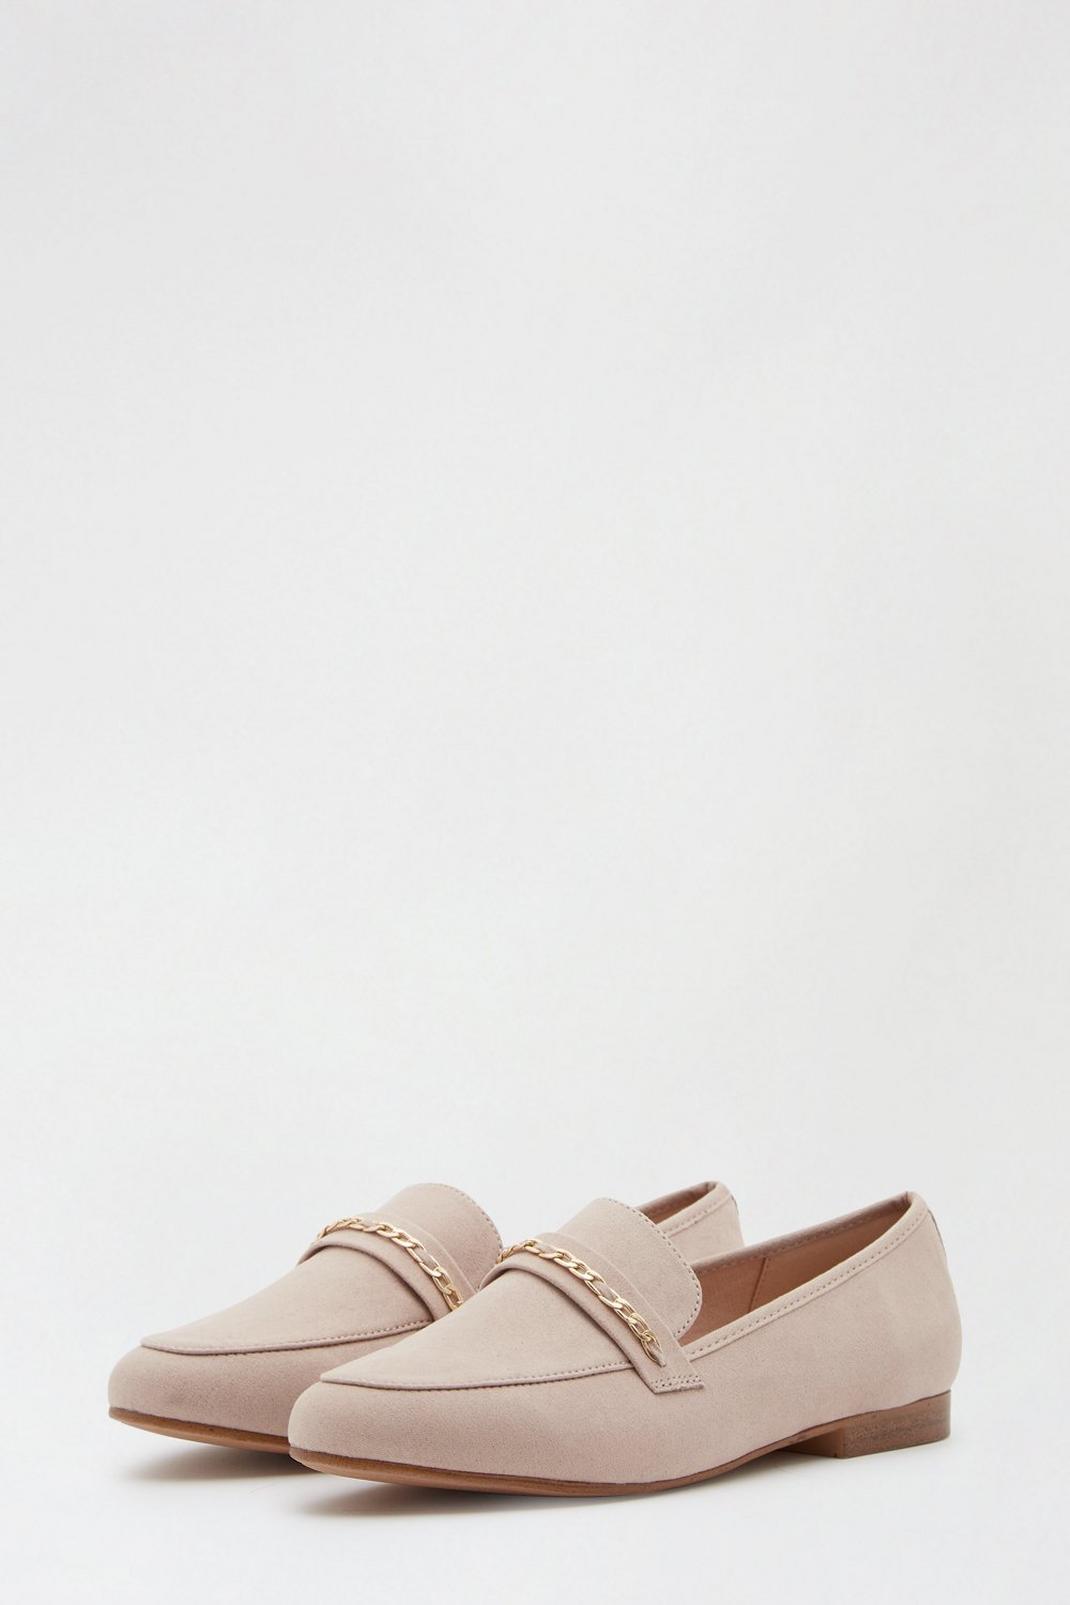 107 Blush 'Lecily' Chain Trim Loafer image number 2